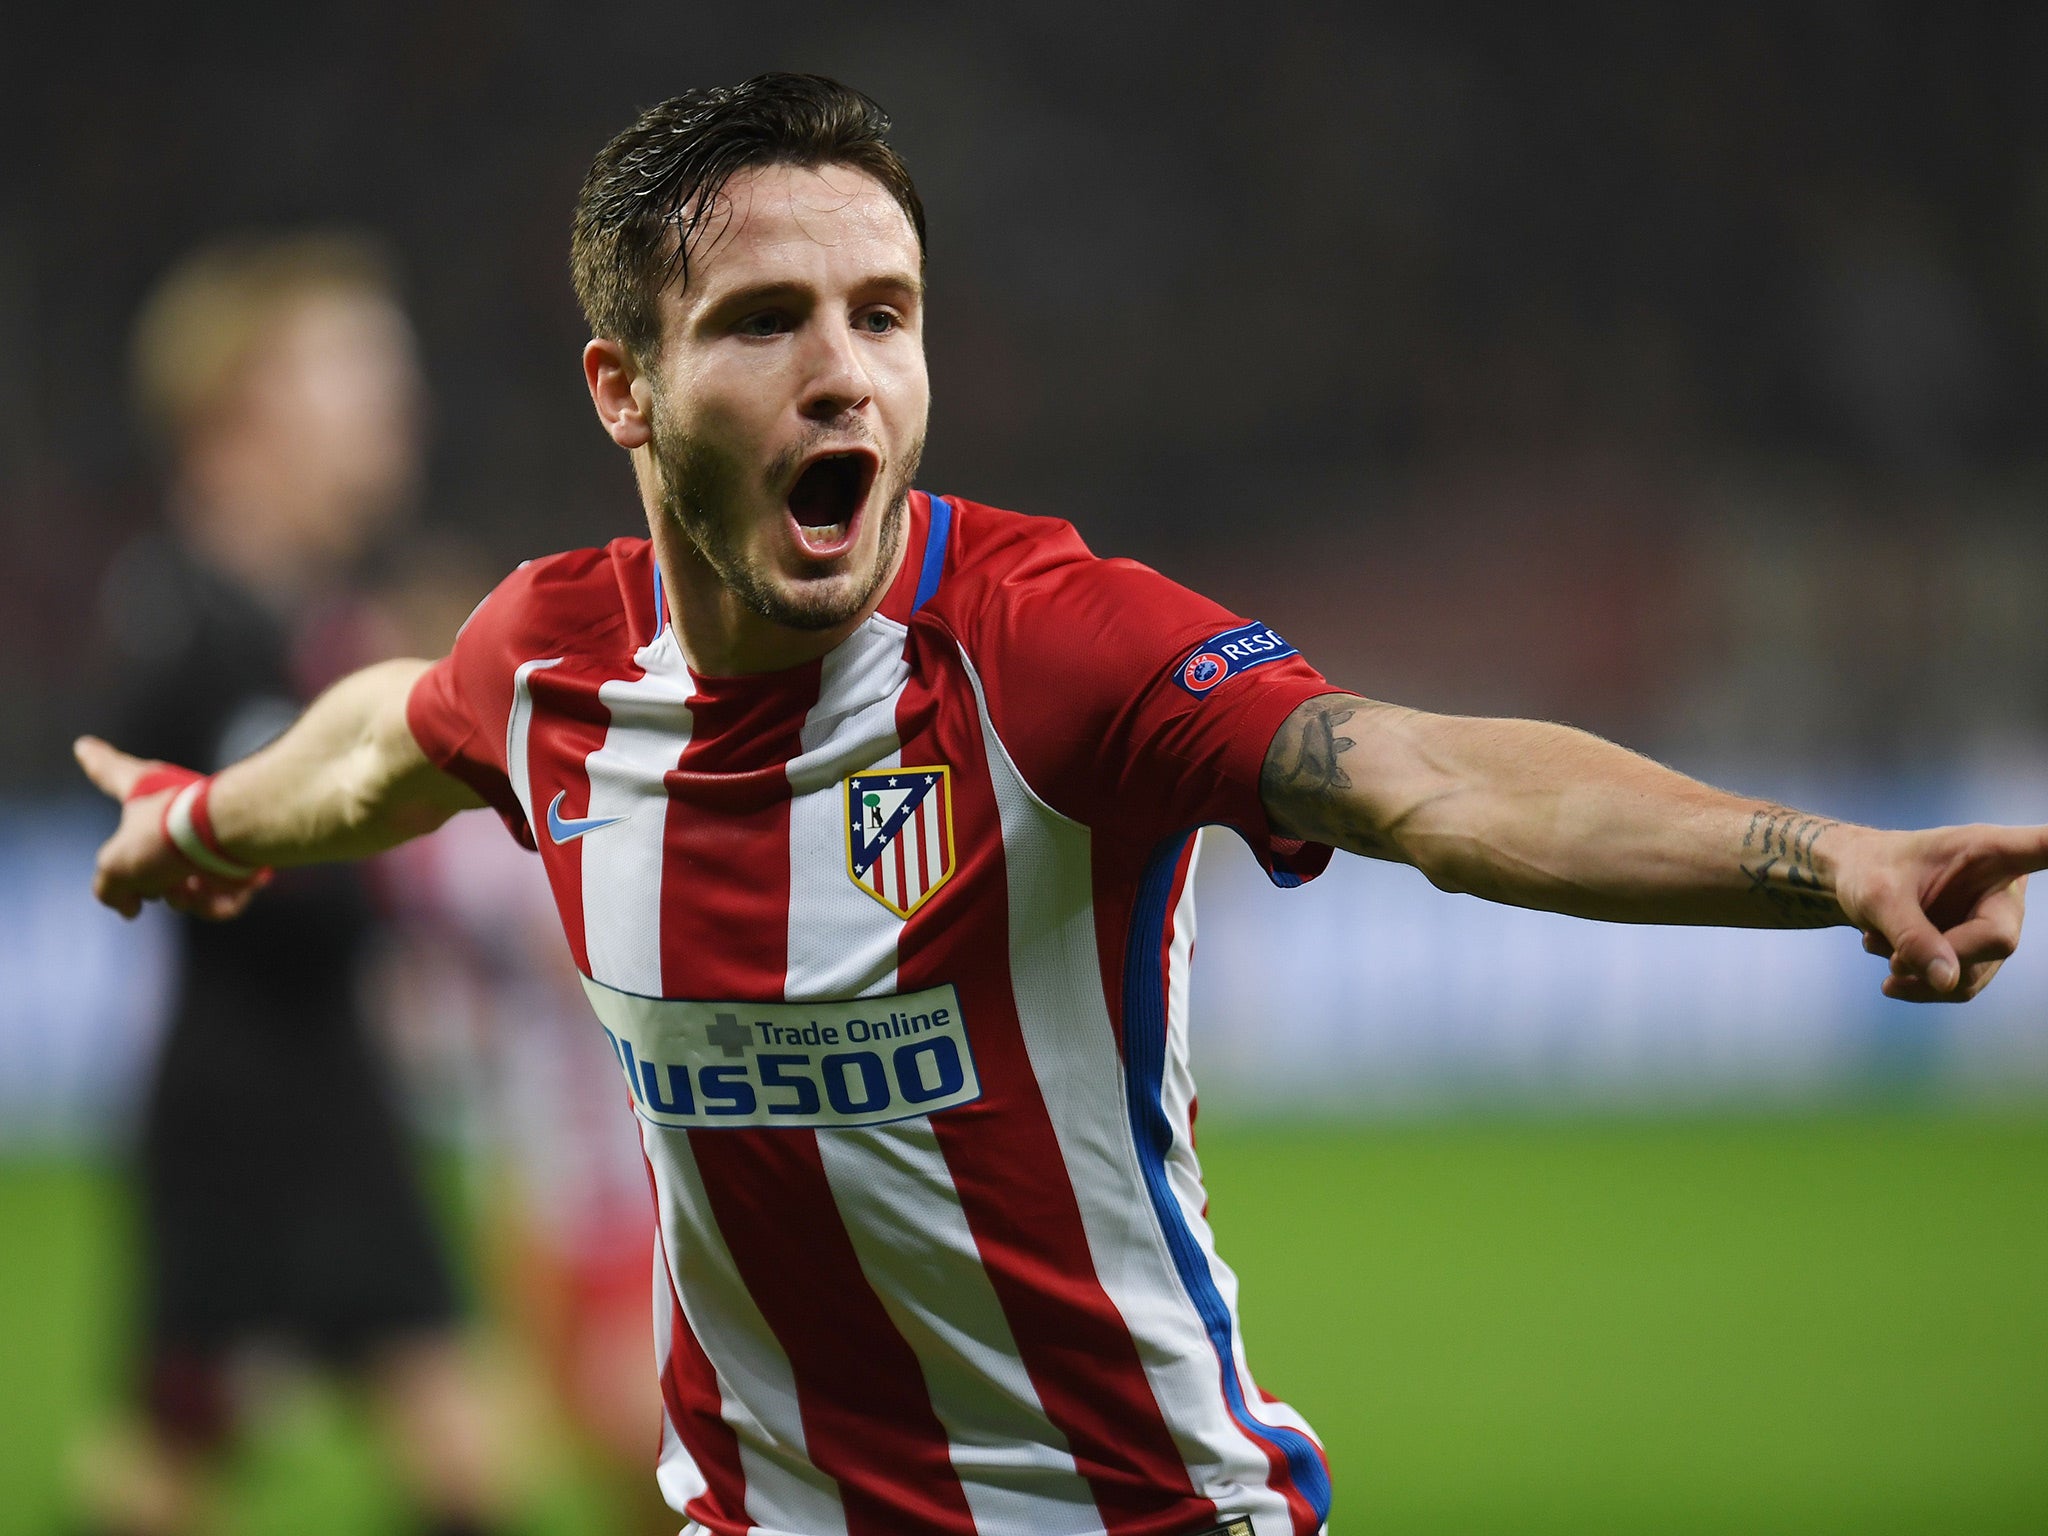 Saul Niguez opened the scoring for Atletico during the first-leg in Leverkusen